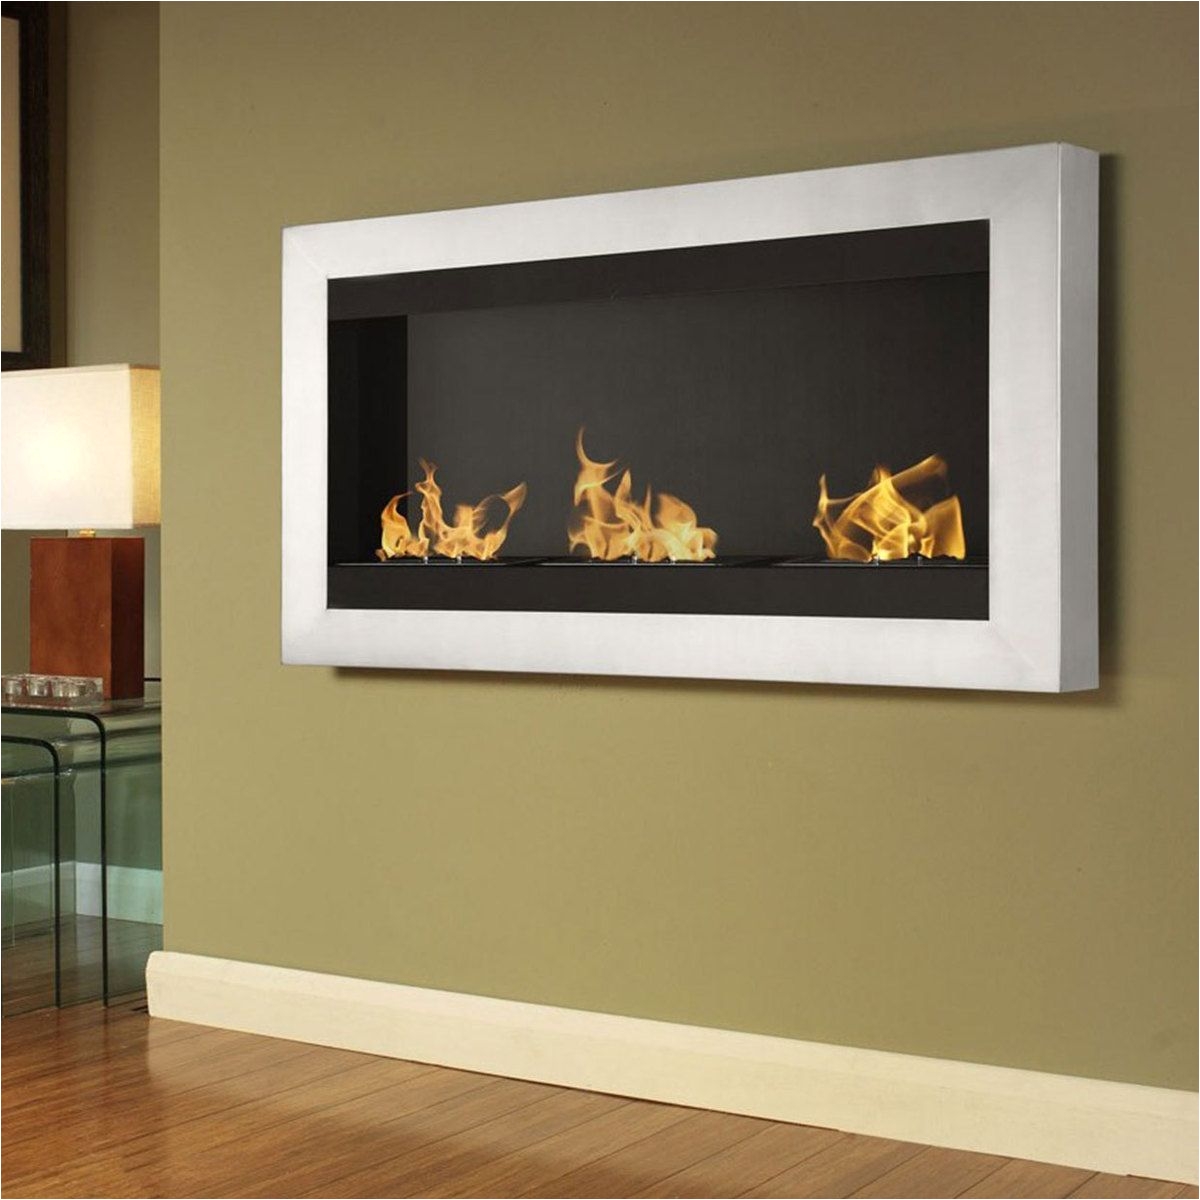 wall mounted ethanol powered fireplace with no leftover soot neat